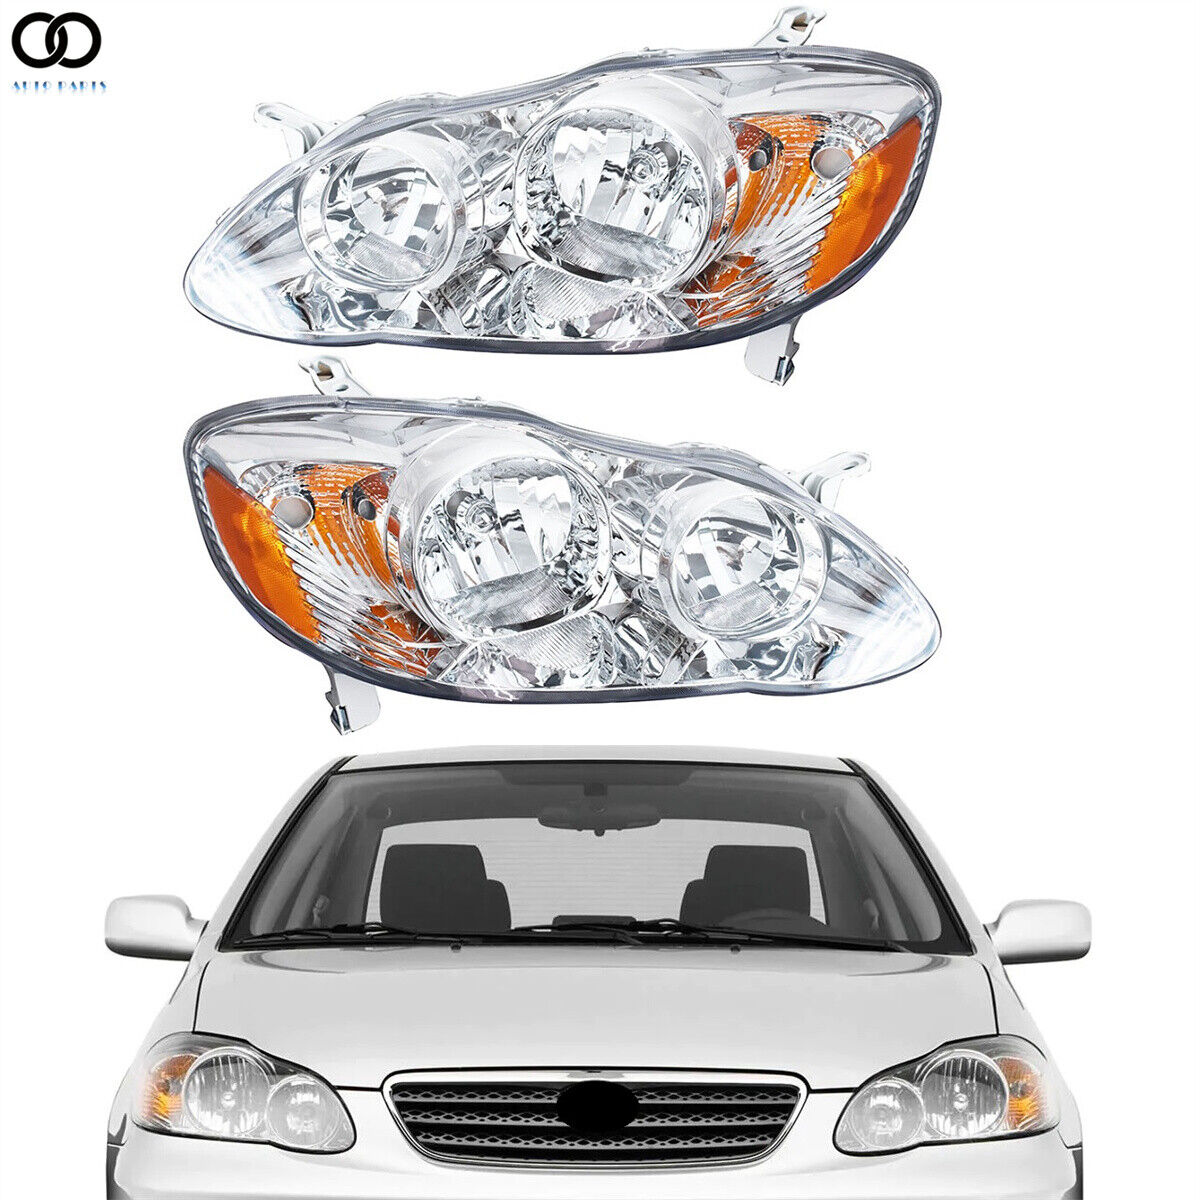 For 03-08 Toyota Corolla Clear Replacement Head Lamps Headlights Left+Right